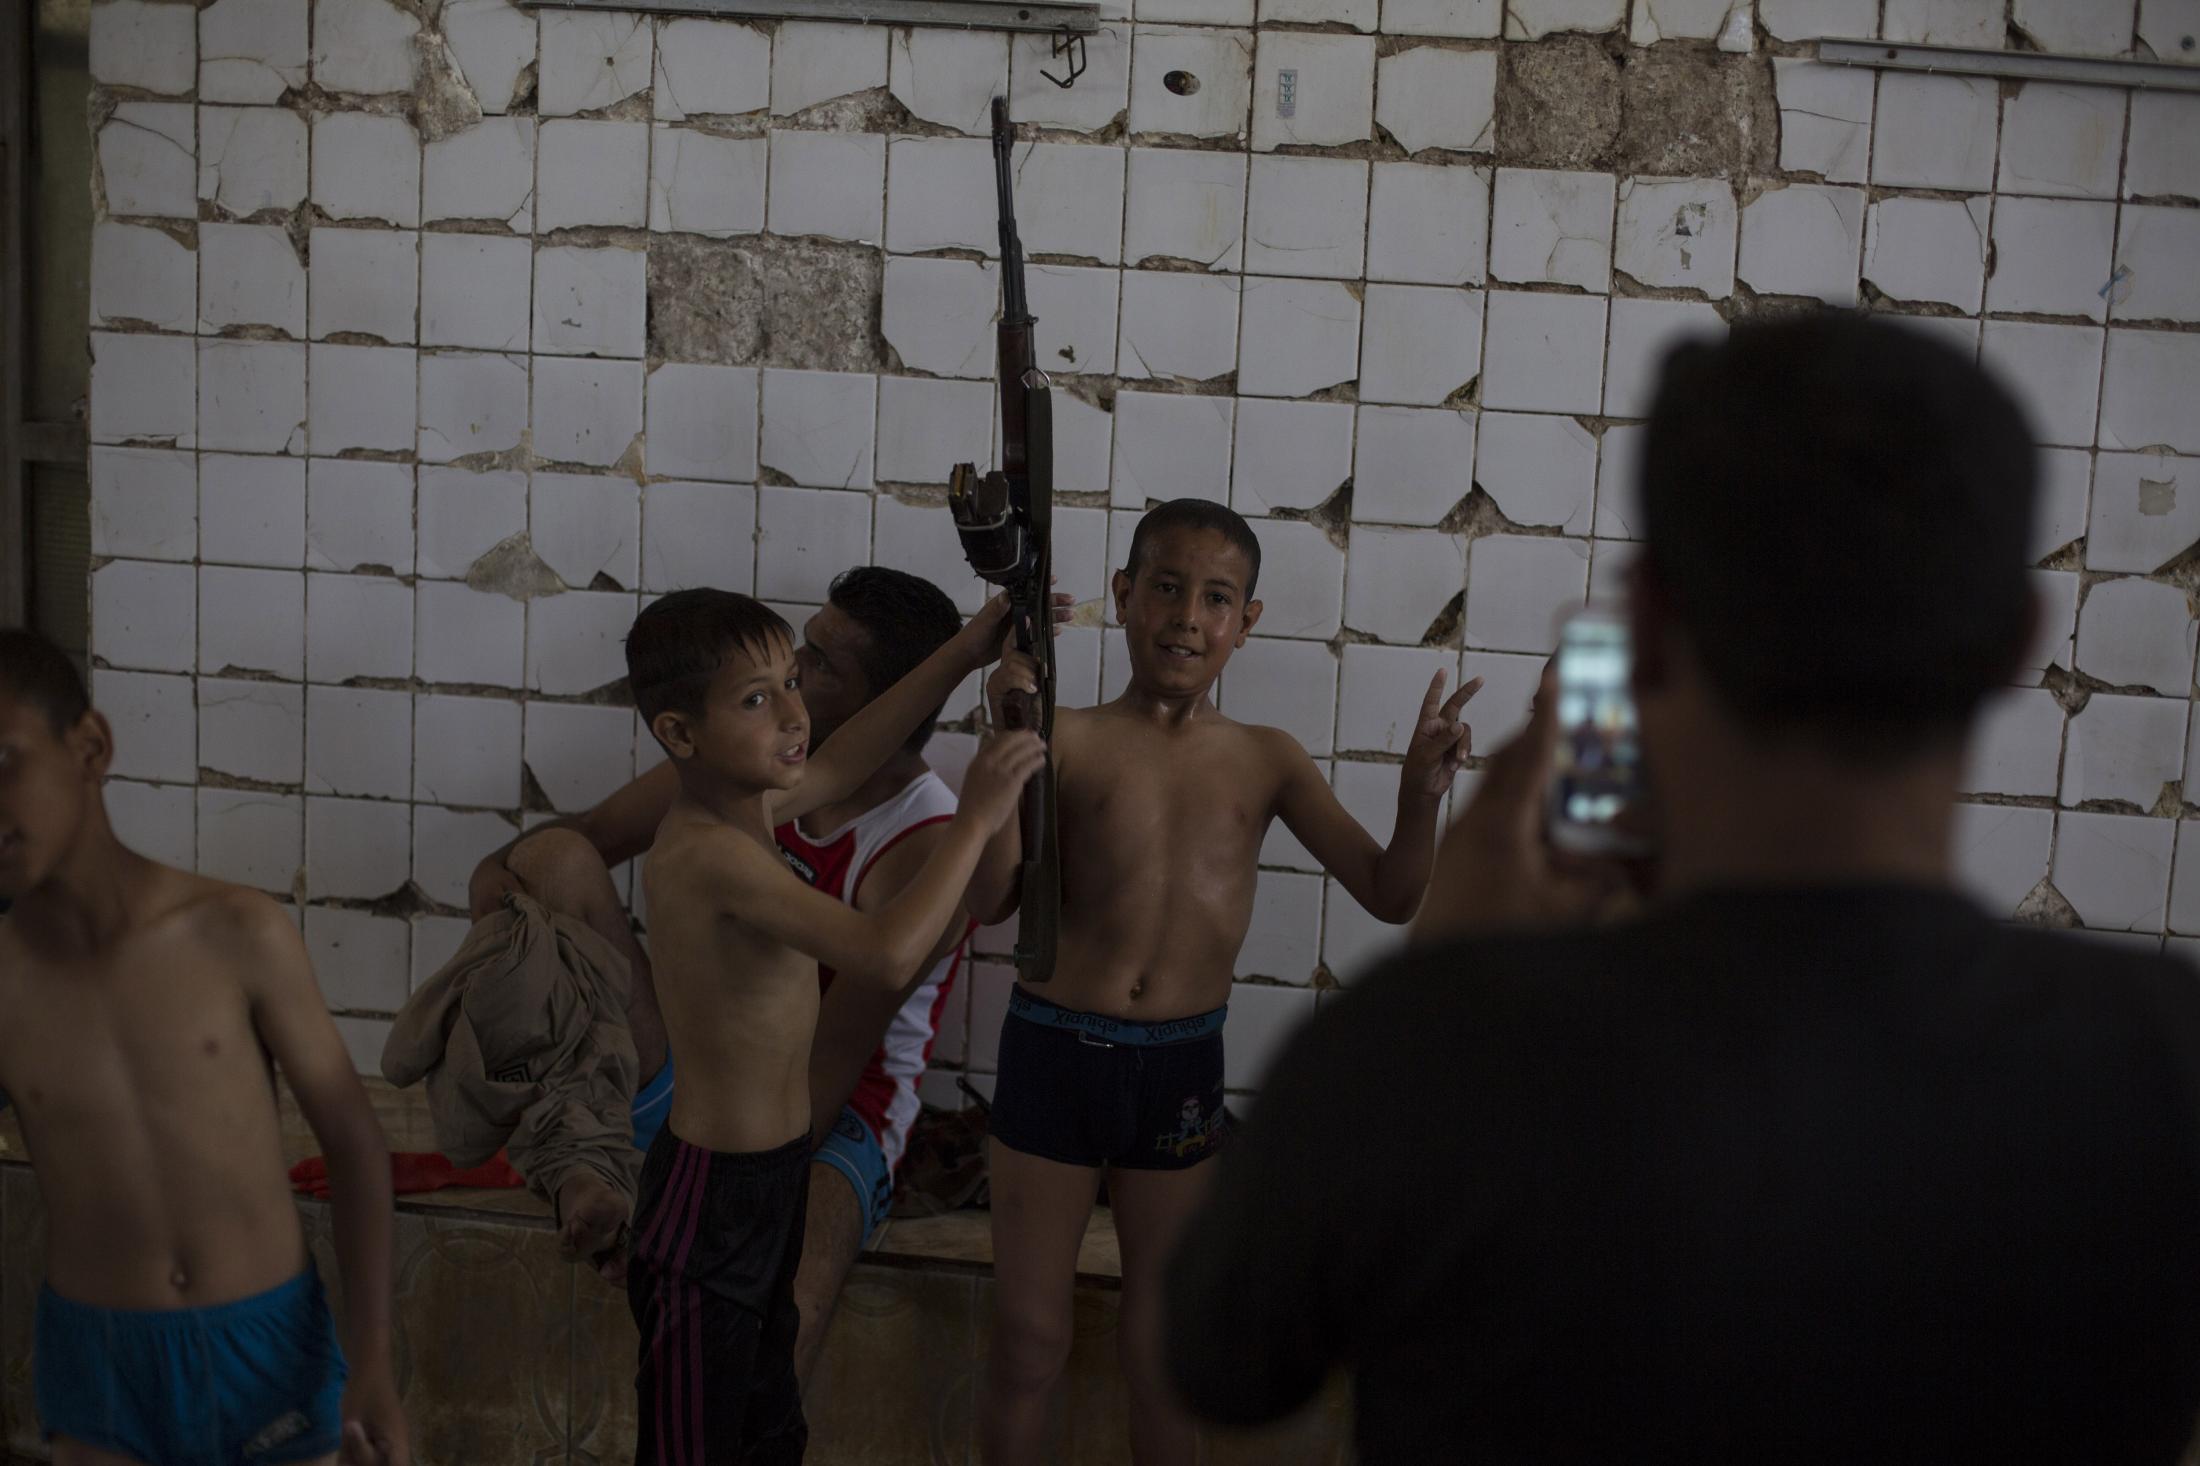 A Spa in Wartime - Children in the Hamam Alil spa south of Mosul, Iraq, pose...